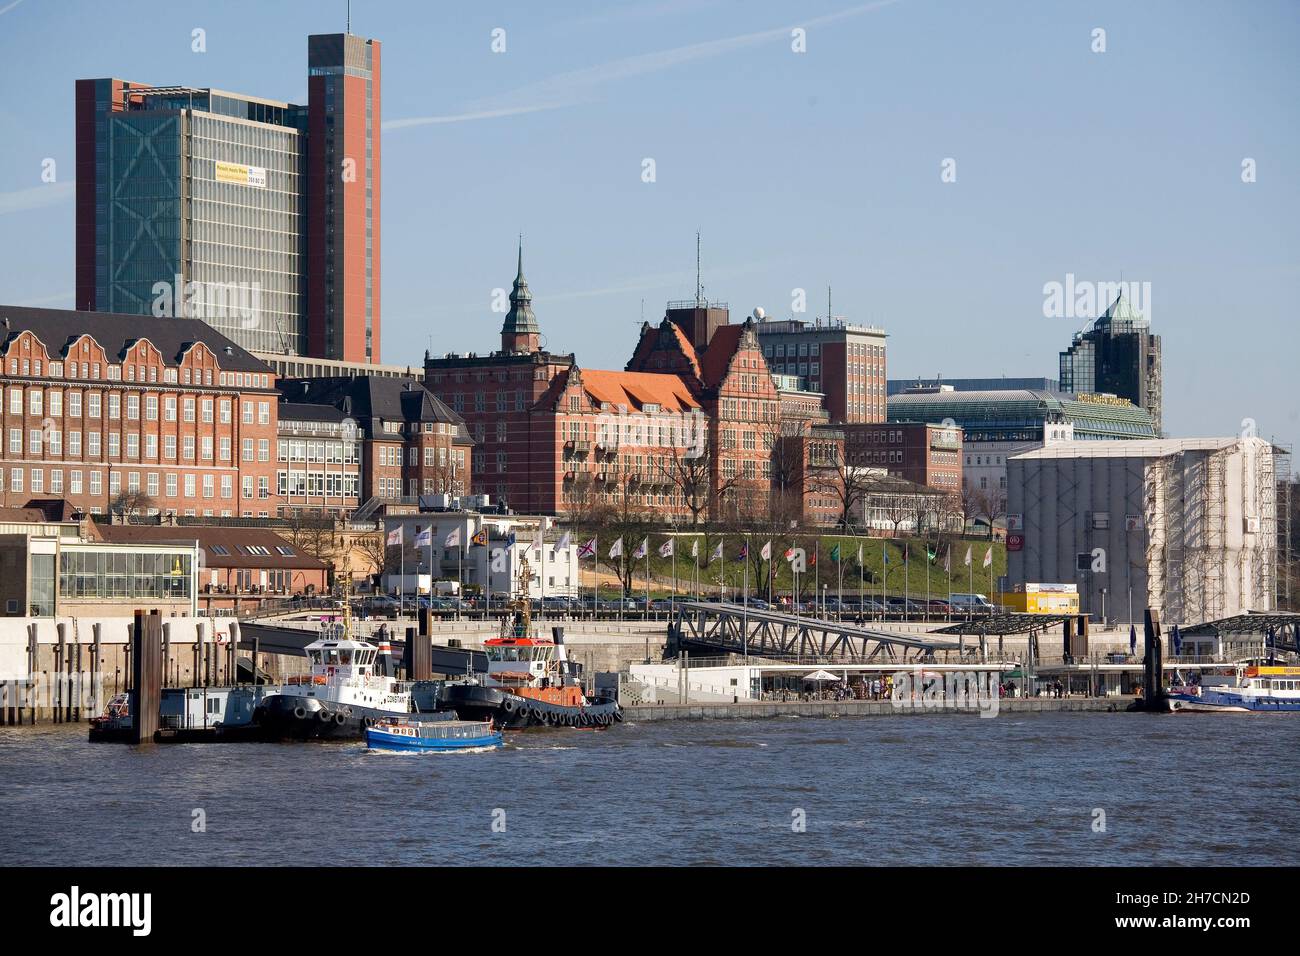 View of the city from the harbour, Germany, Hamburg, Port of Hamburg Stock Photo